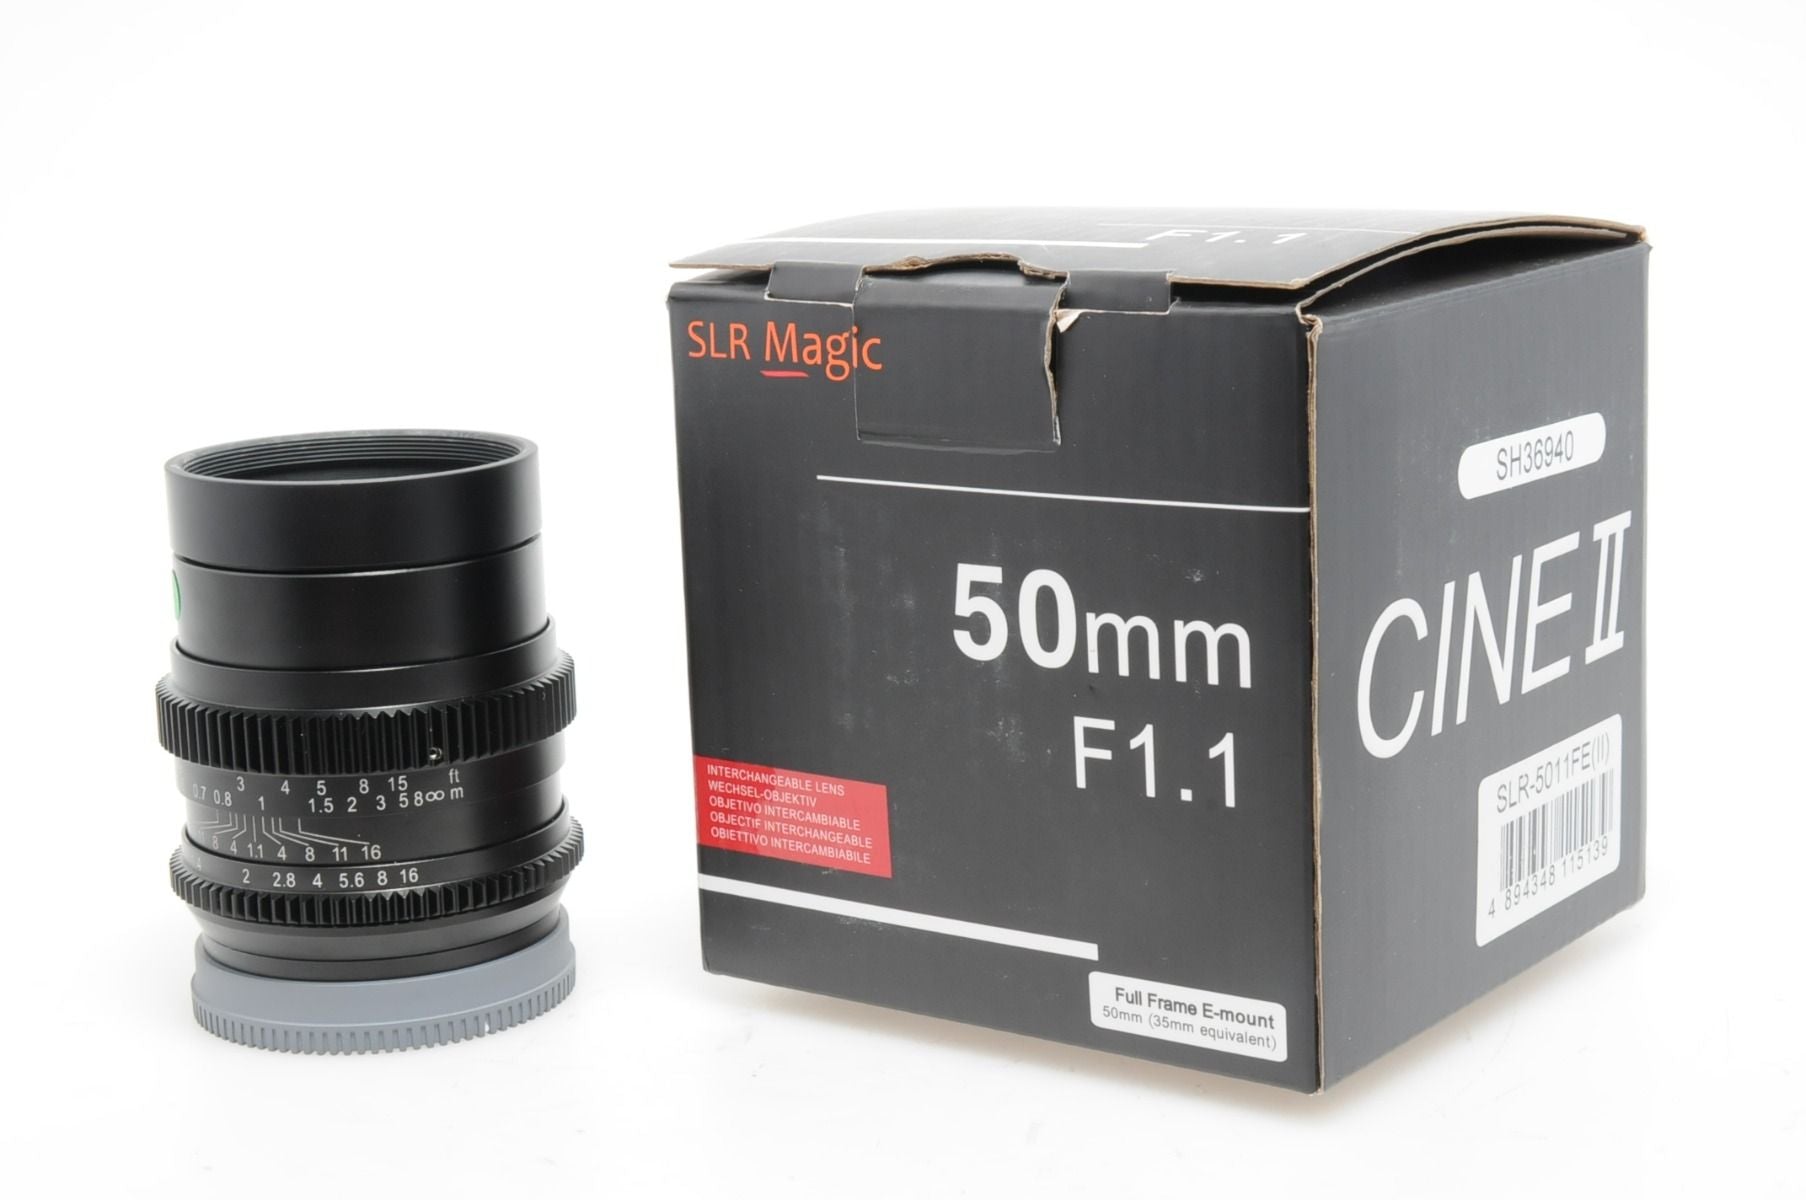 Product Image of Used SLR MAGIC 50mm F1.1 Cine II Lens for Sony FE (Boxed SH36940)